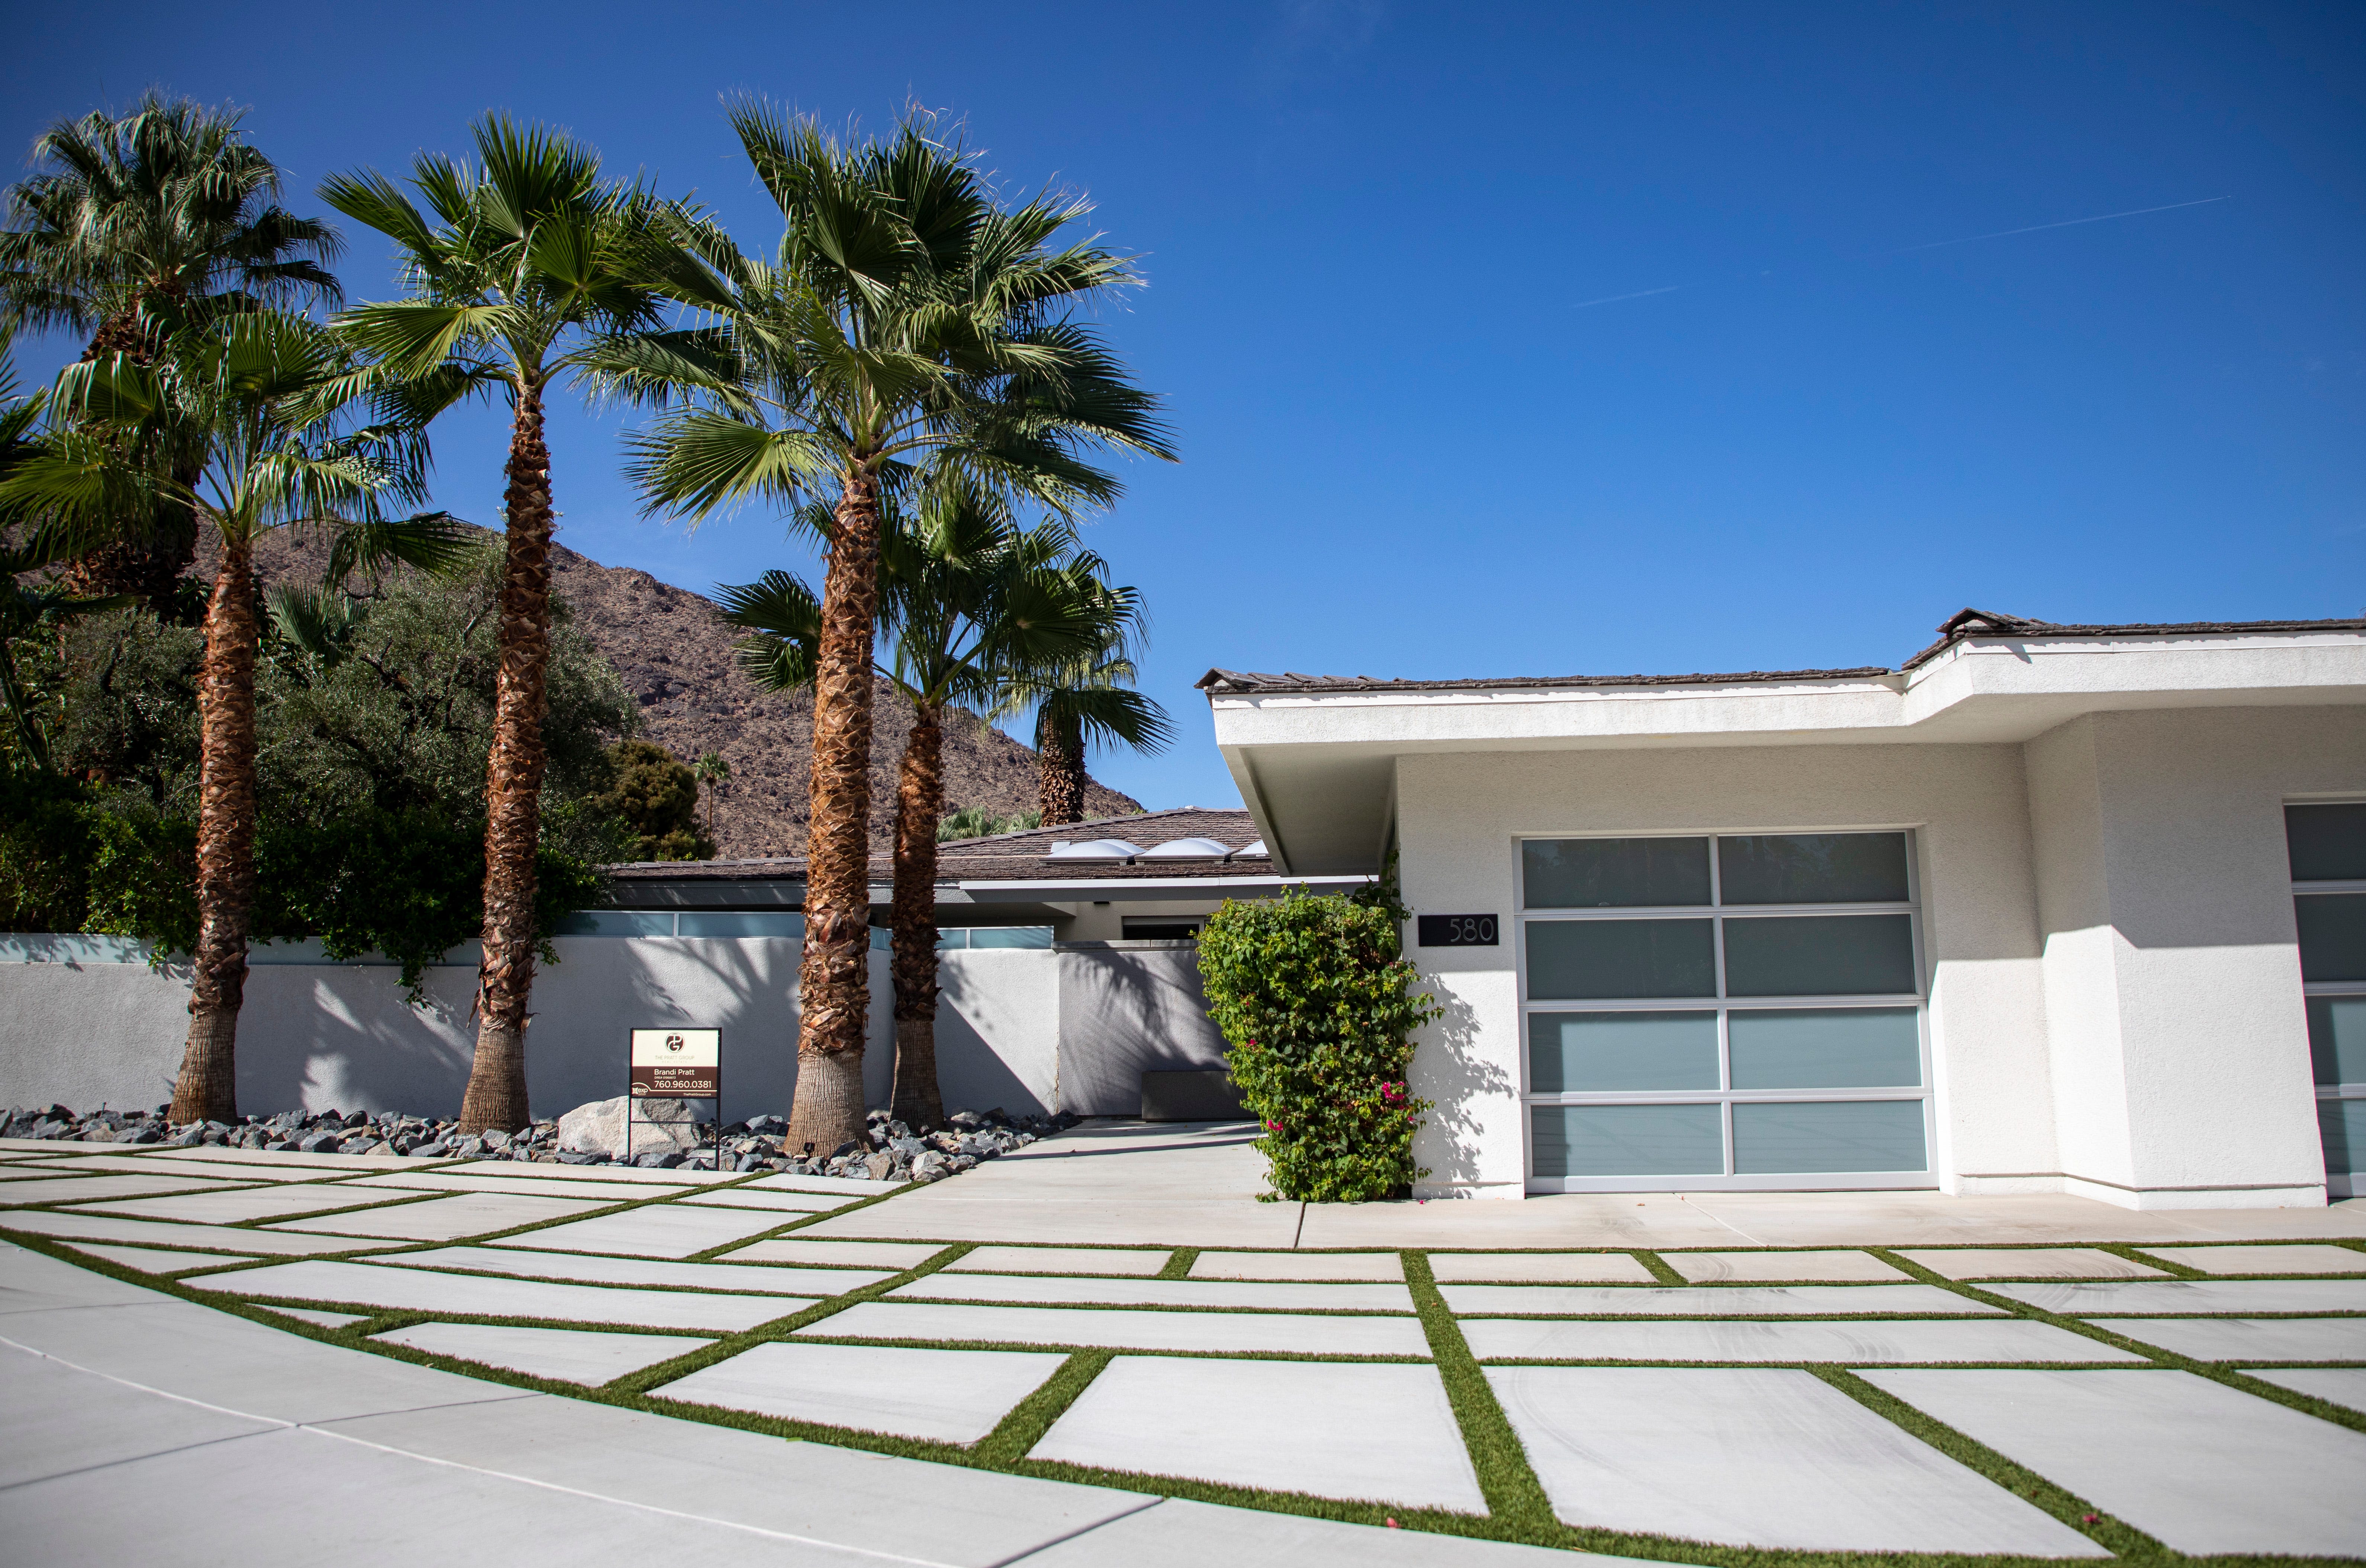 Palm Springs council approves Pacaso and other ‘co-owned’ homes despite criticism